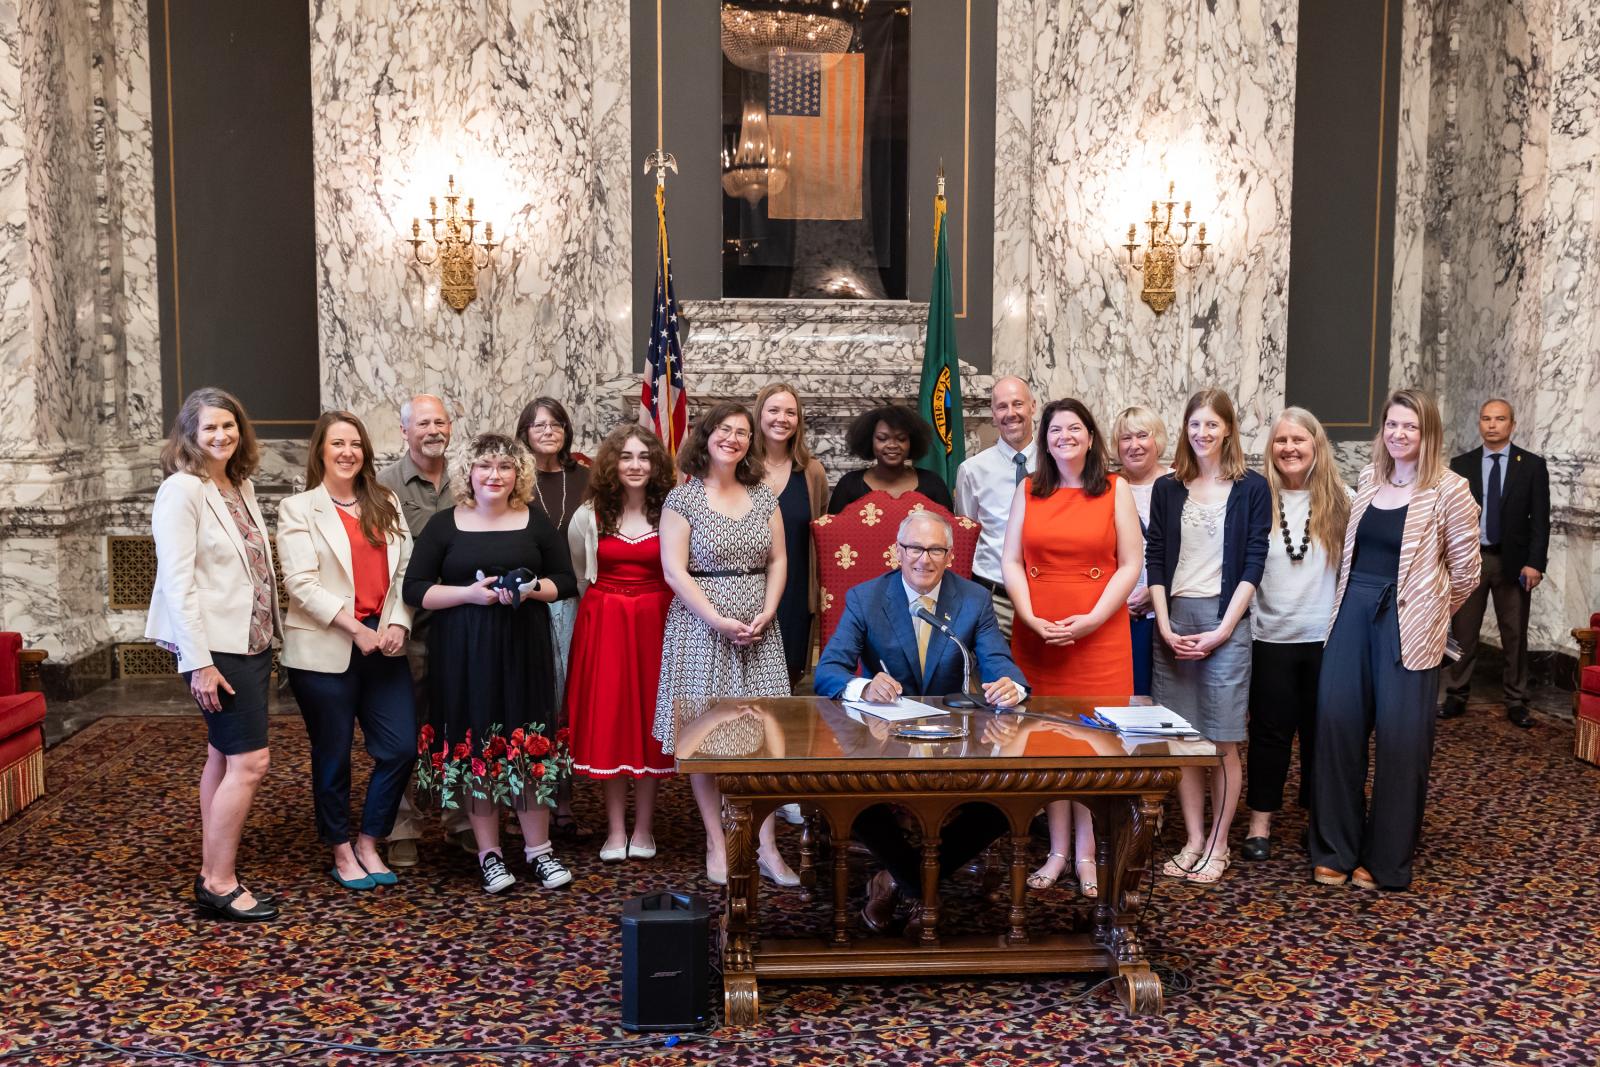 WDFW staff and others with Governor at signing of Senate Bill 5371